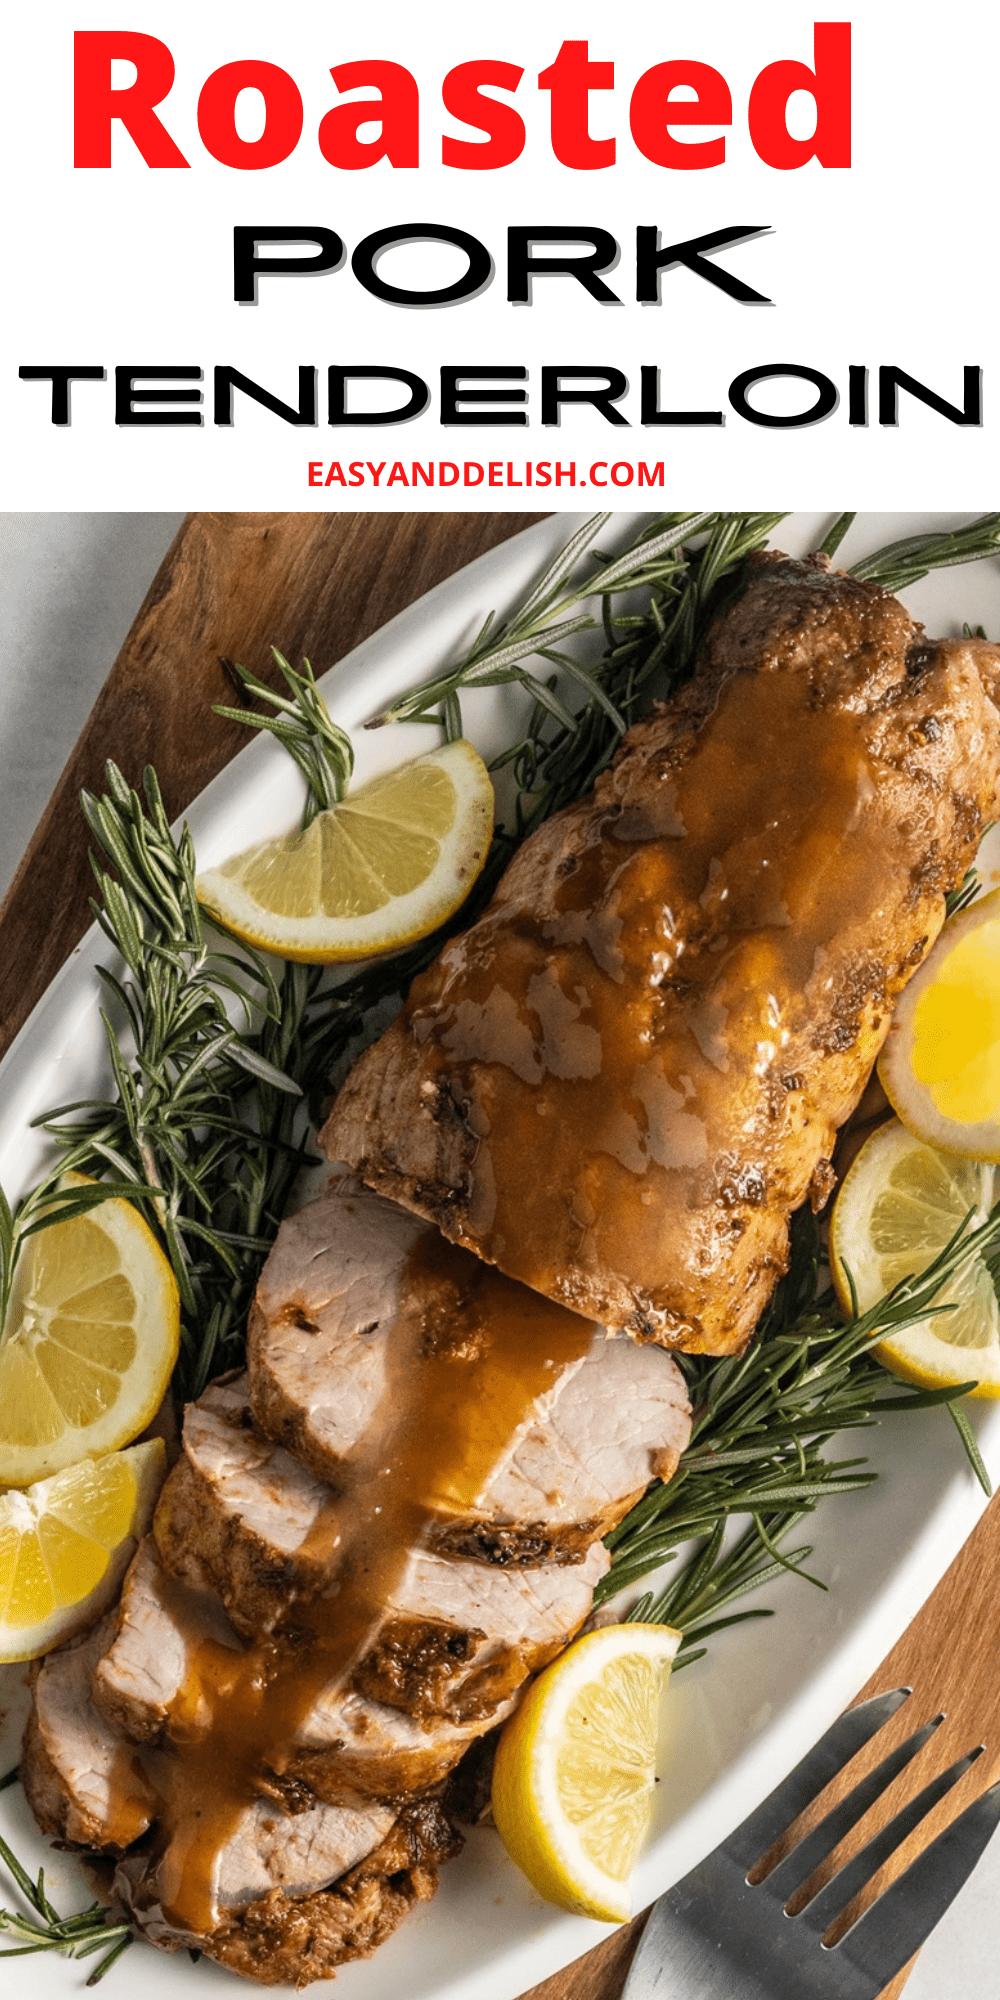 Close-up of roasted pork tenderloin garnished with lemon and rosemary.